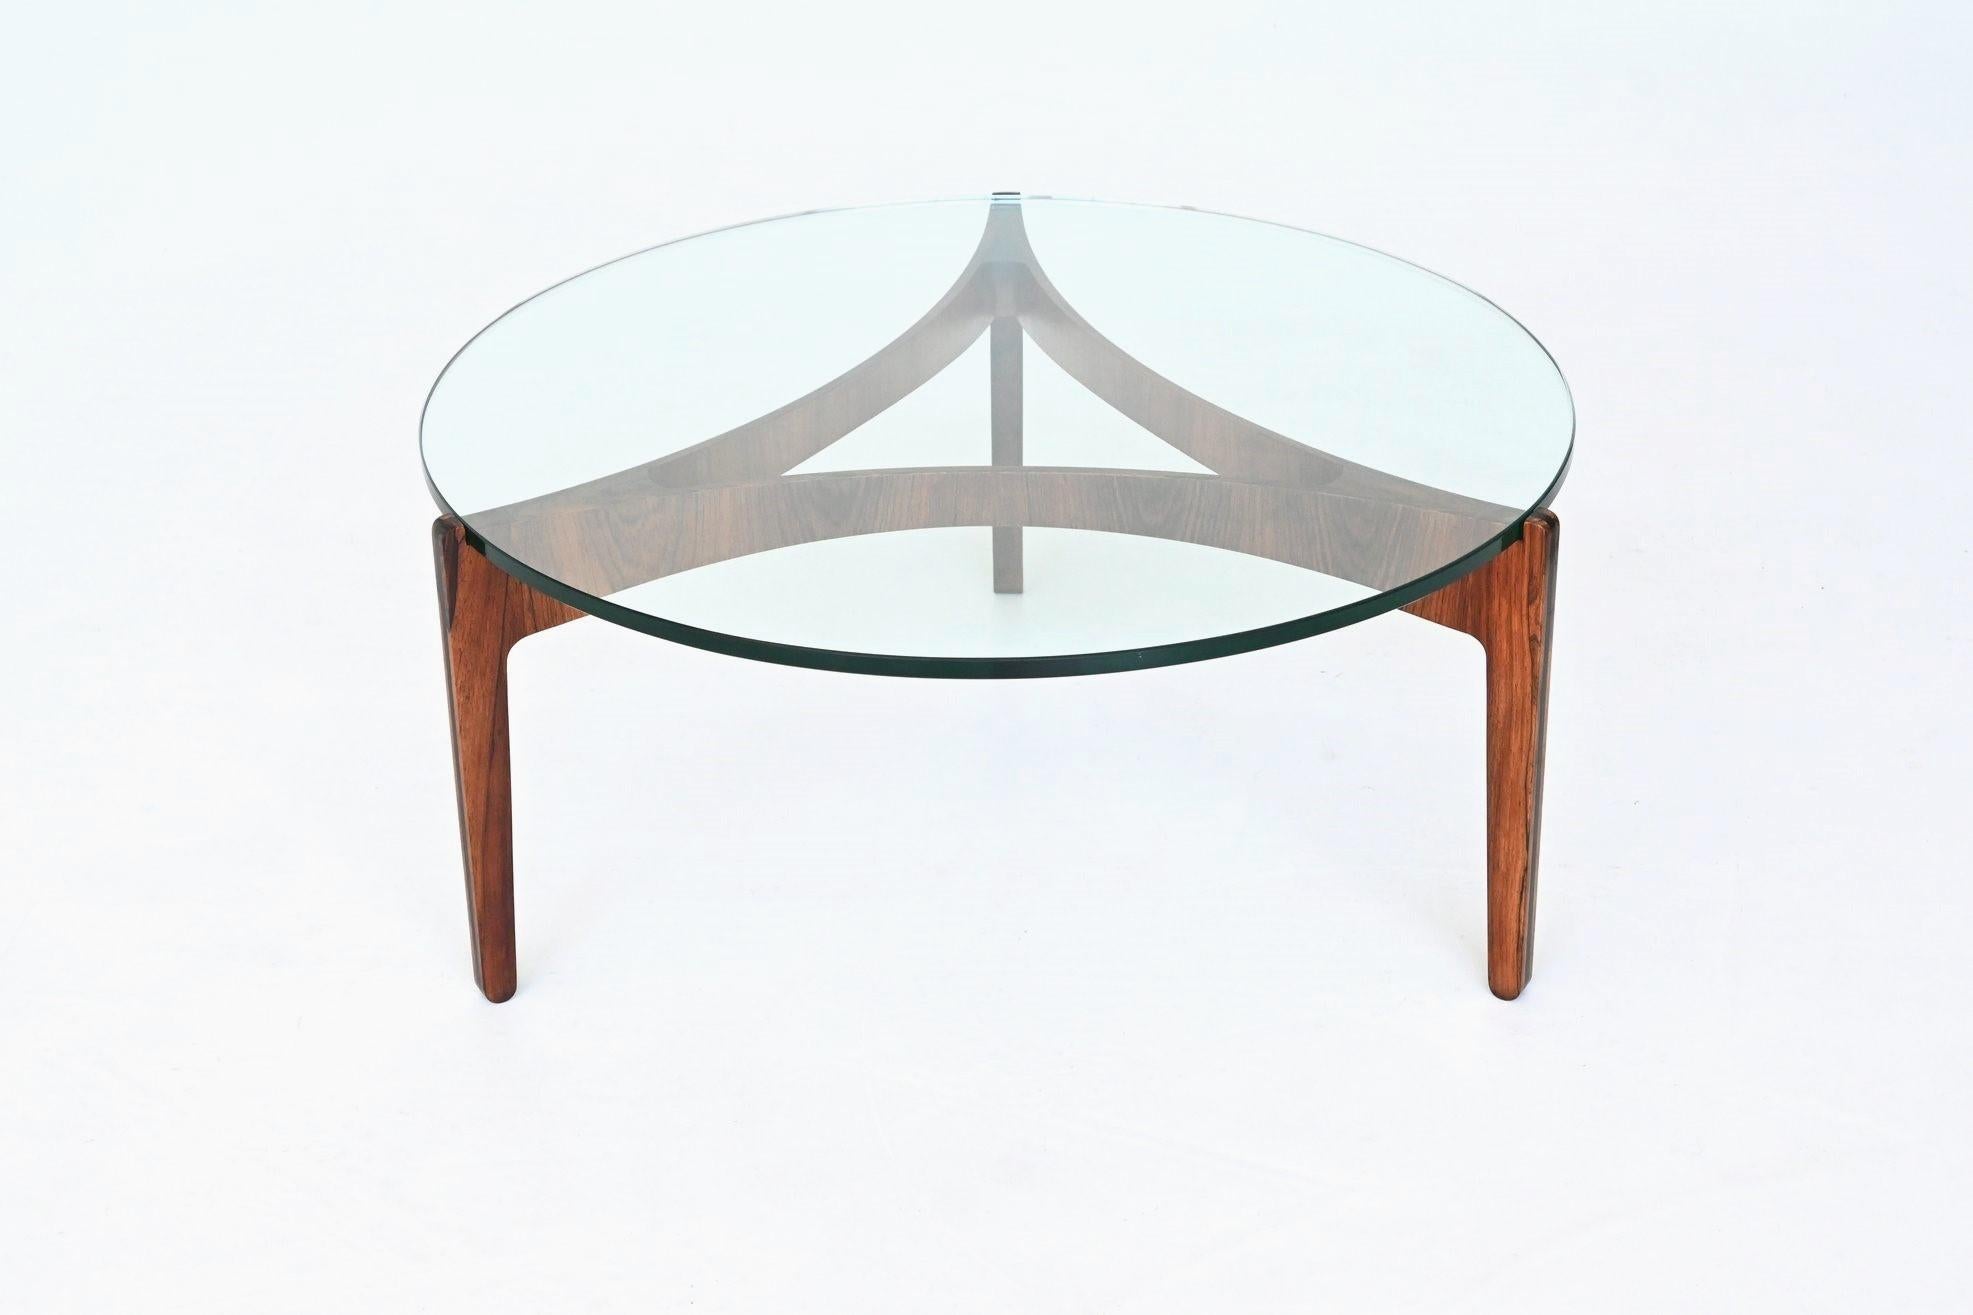 Stunning sculptural coffee table model 104 designed by Sven Ellekaer for Chirstian Linneberg, Denmark 1962. This exquisite coffee table is composed of a beautiful elegant bent rosewood base highly figured grain which supporting a thick transparent